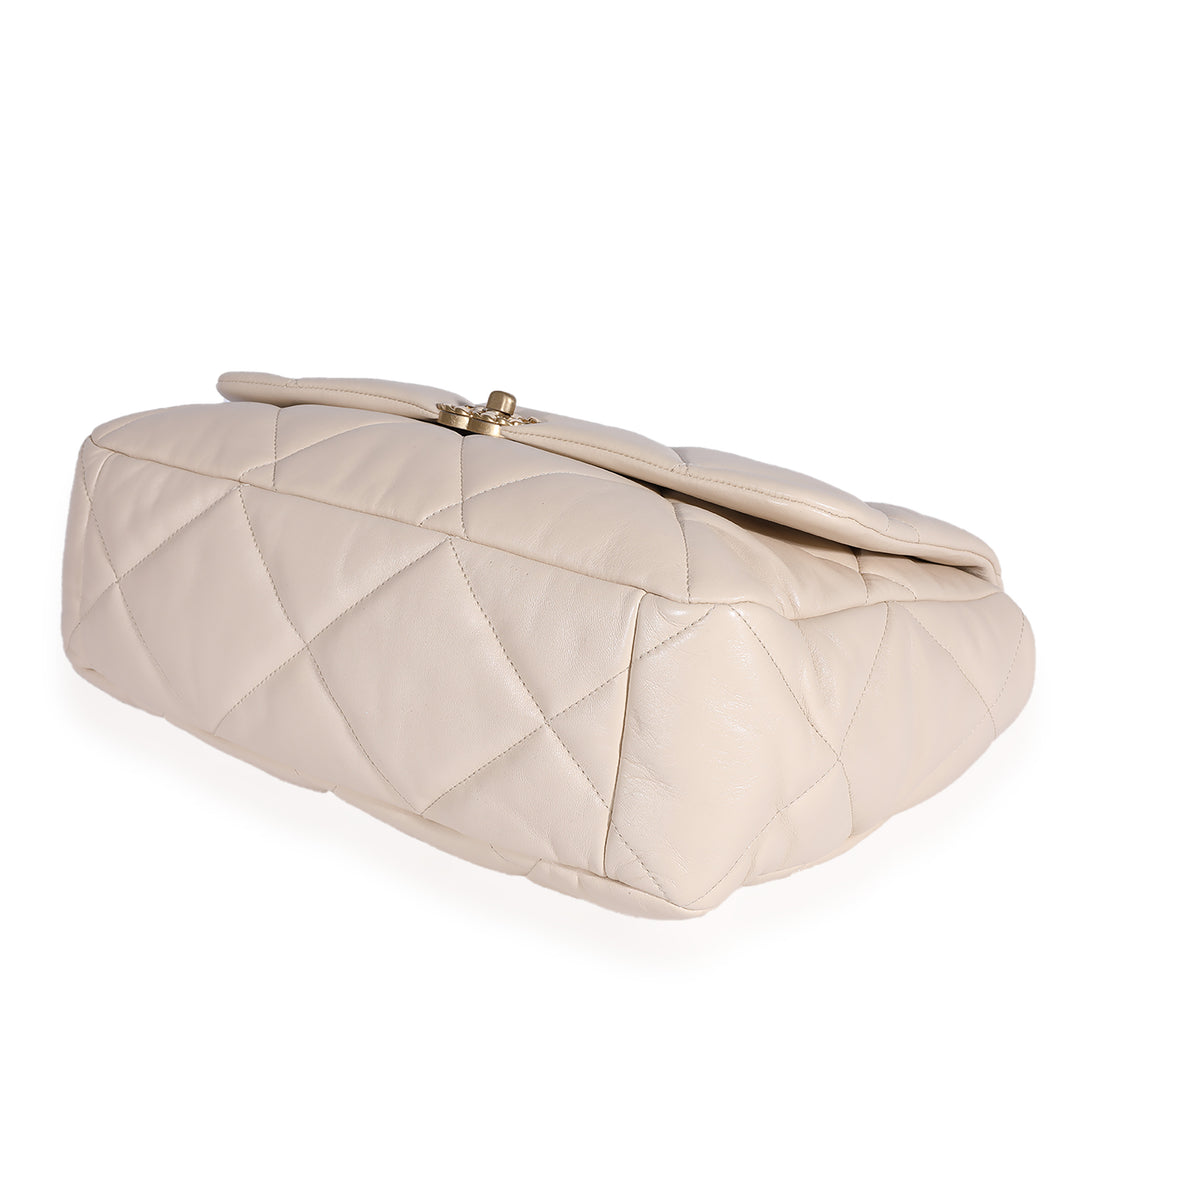 Chanel Beige Quilted Lambskin Chanel 19 Maxi Flap Bag